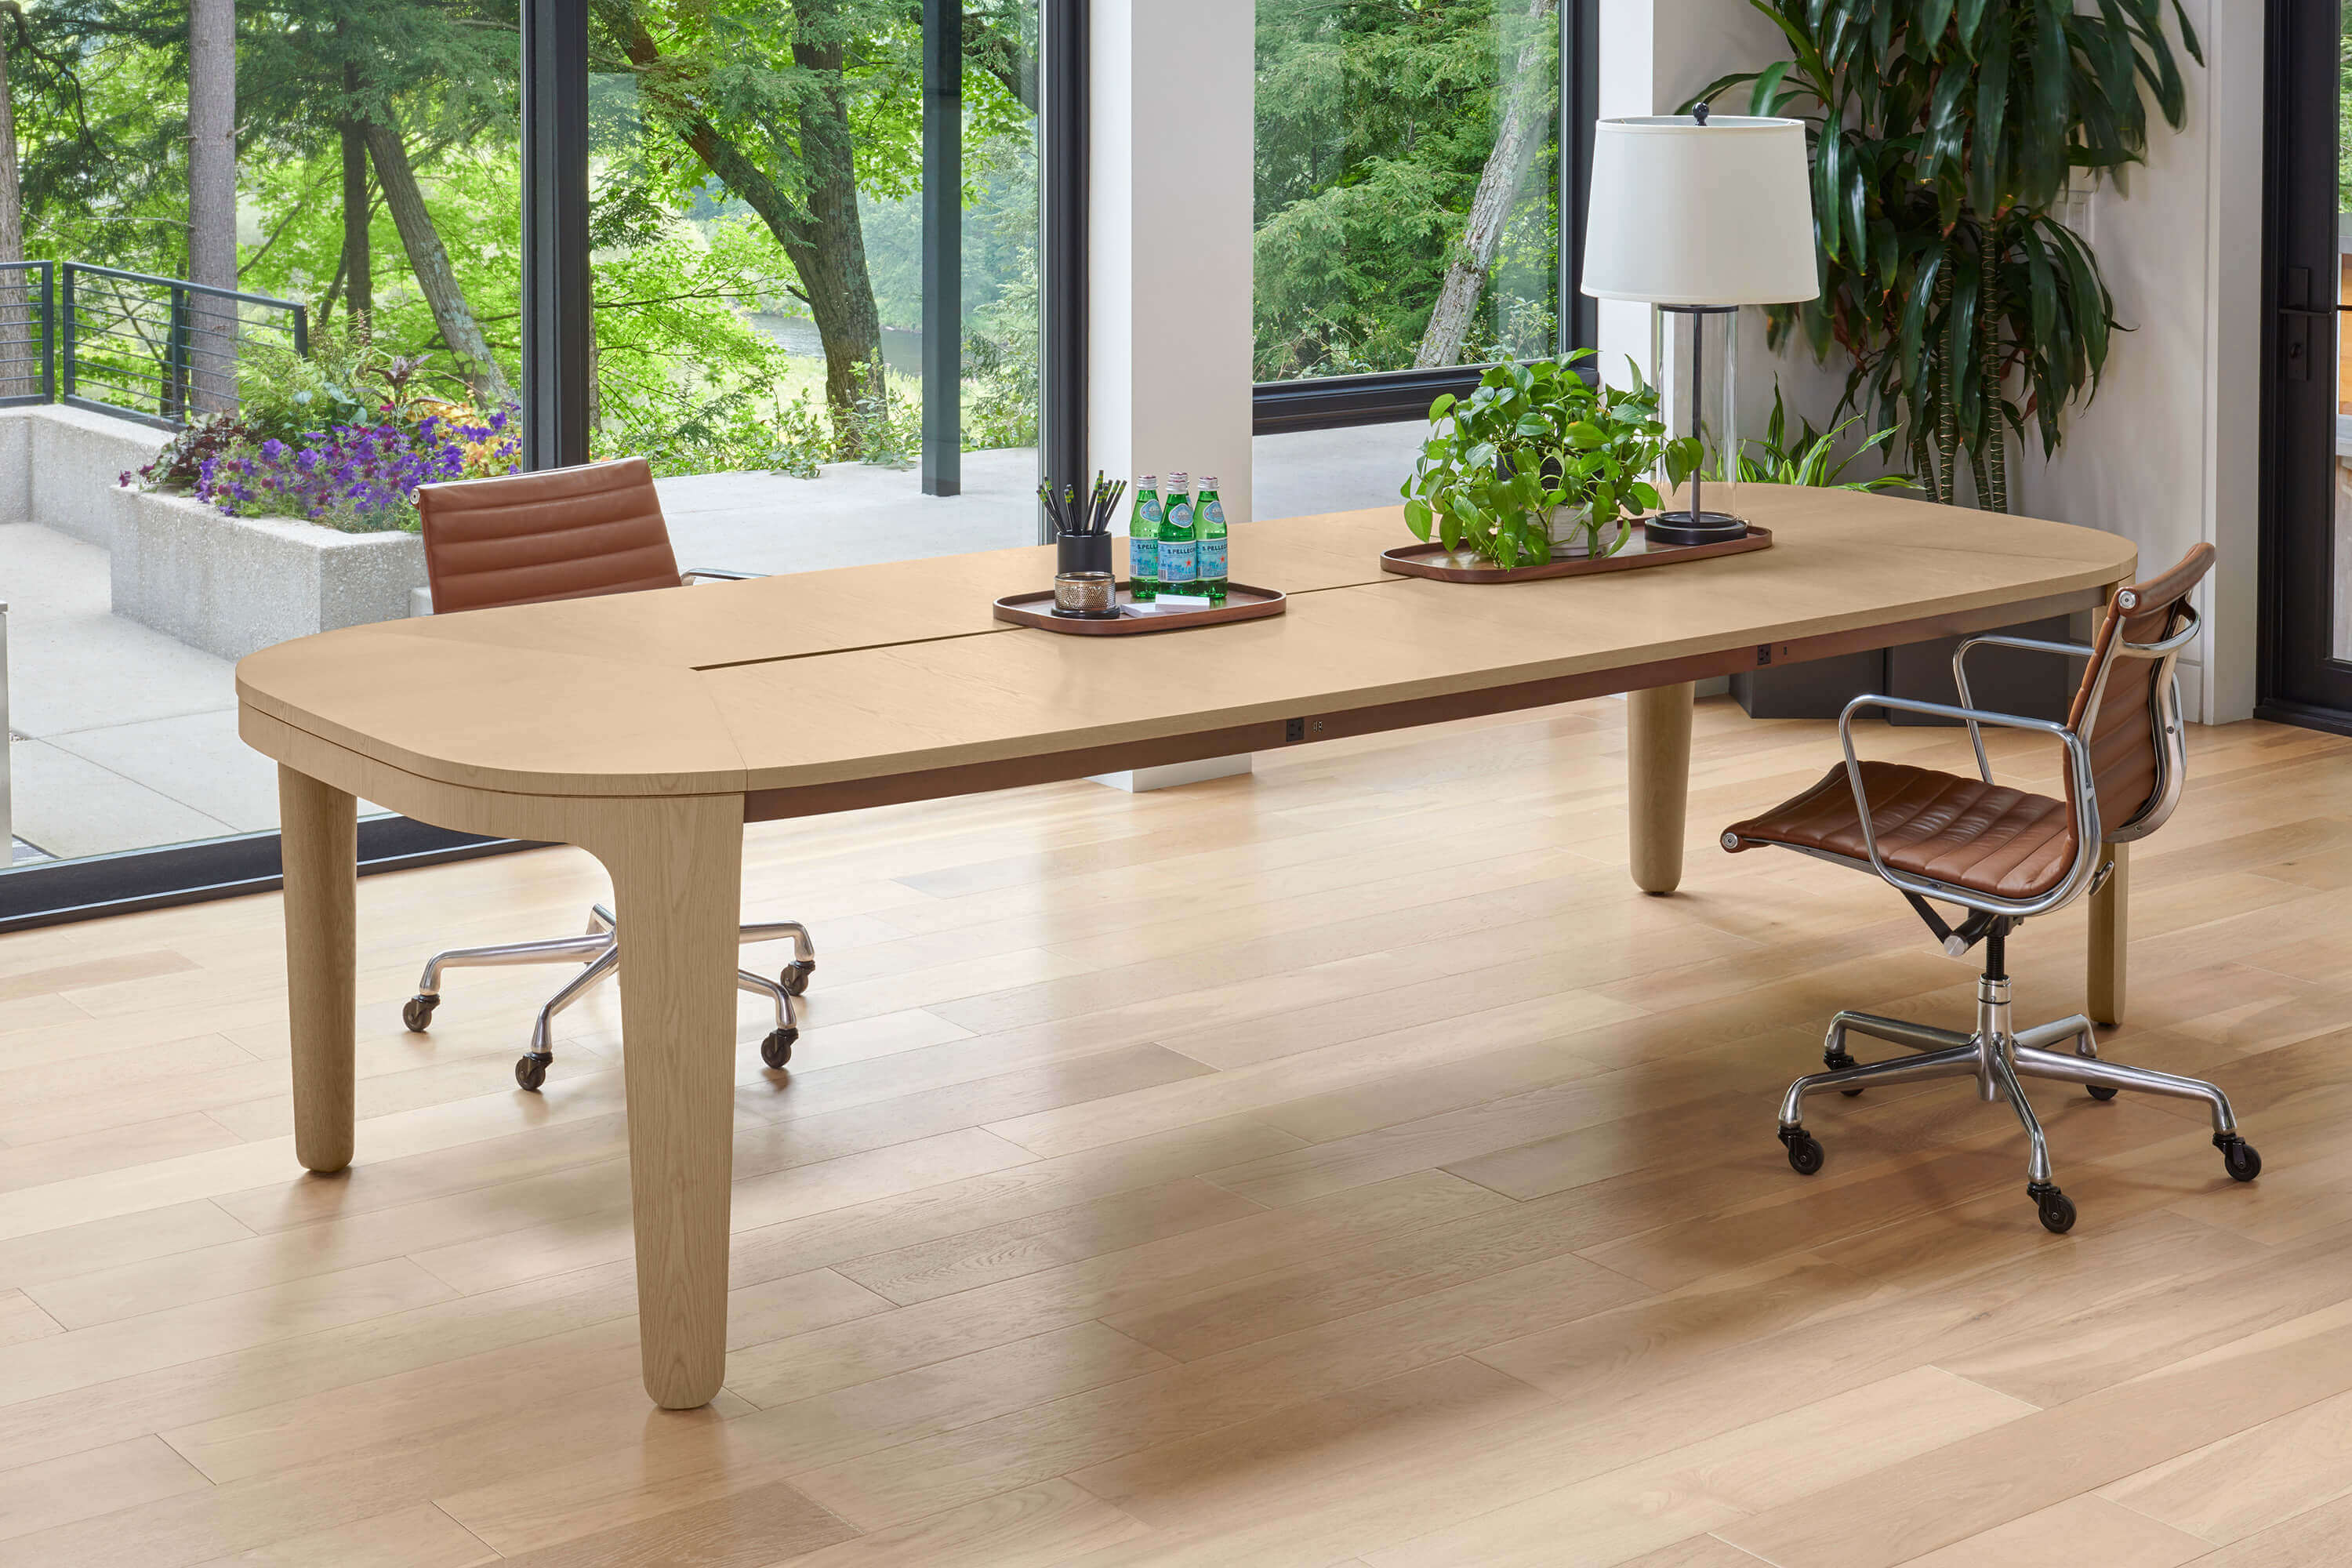 Alev Meeting is a mid-century modern conference table designed by Ayse Birsel and Bibi Seck.